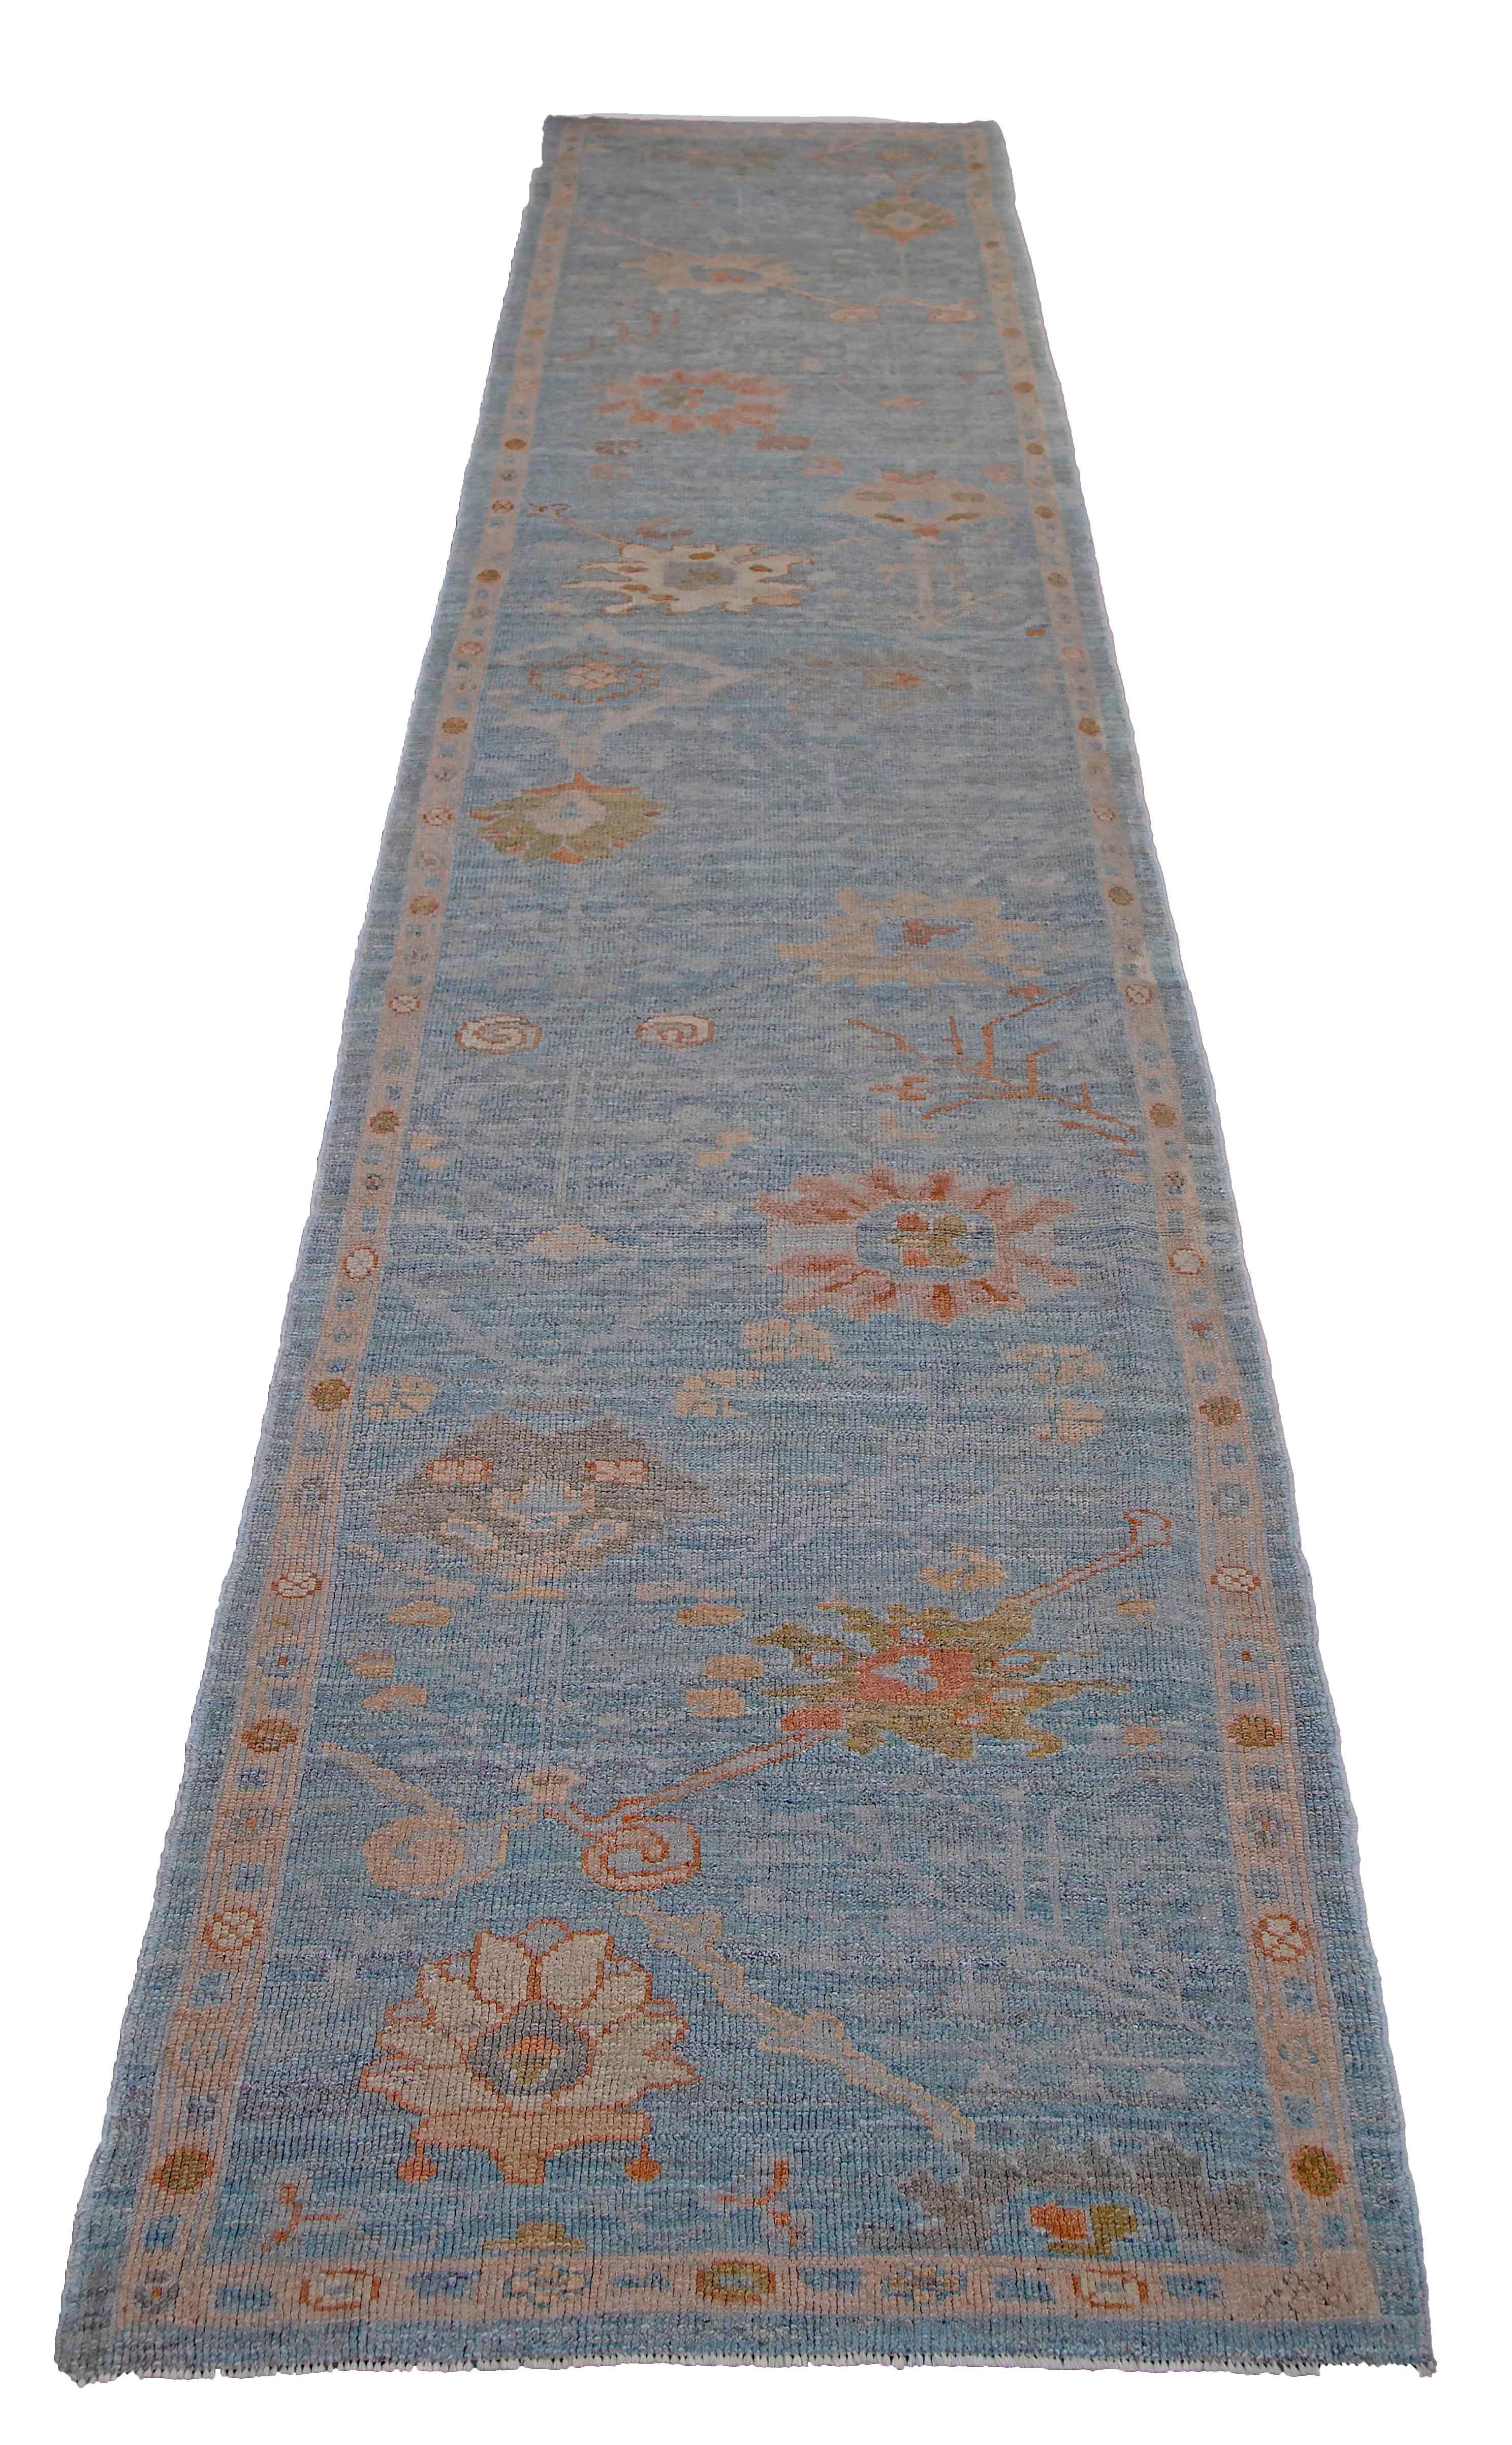 New Turkish runner rug made of handwoven sheep’s wool of the finest quality. It’s colored with organic vegetable dyes that are certified safe for humans and pets alike. It features floral details in green and pink over a lovely blue field. Flower